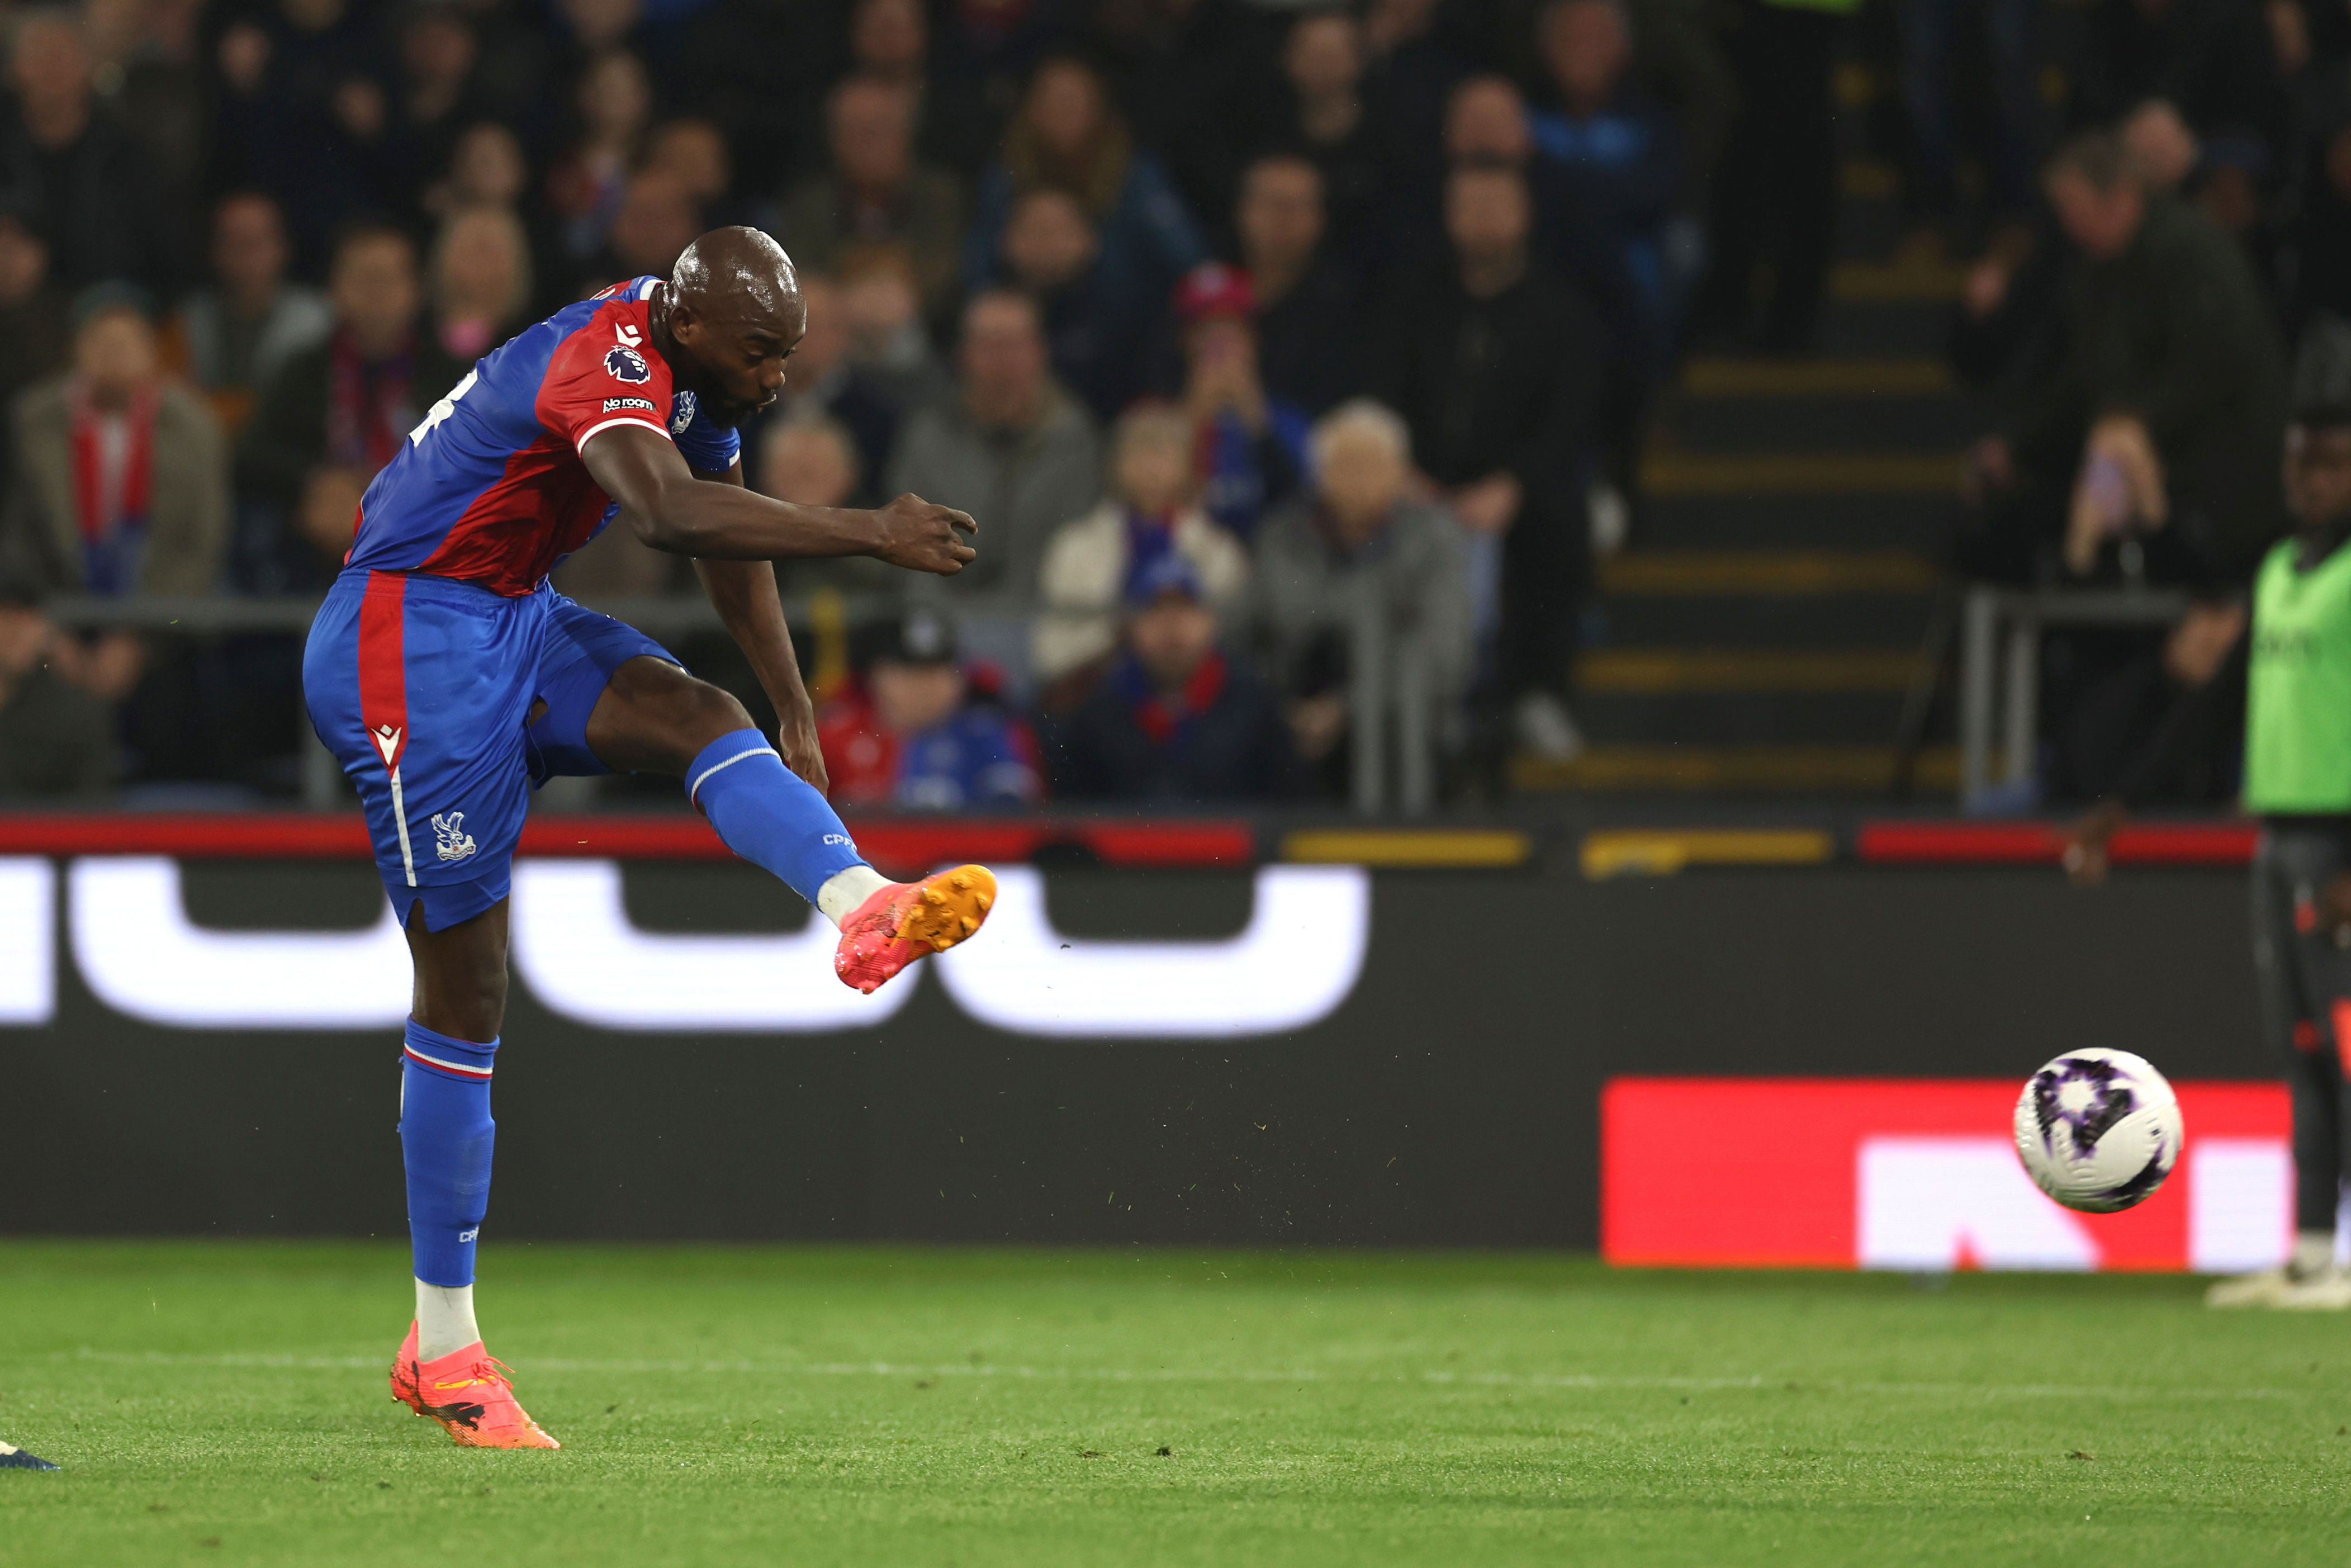 manchester united’s season hits new low after crystal palace humiliation